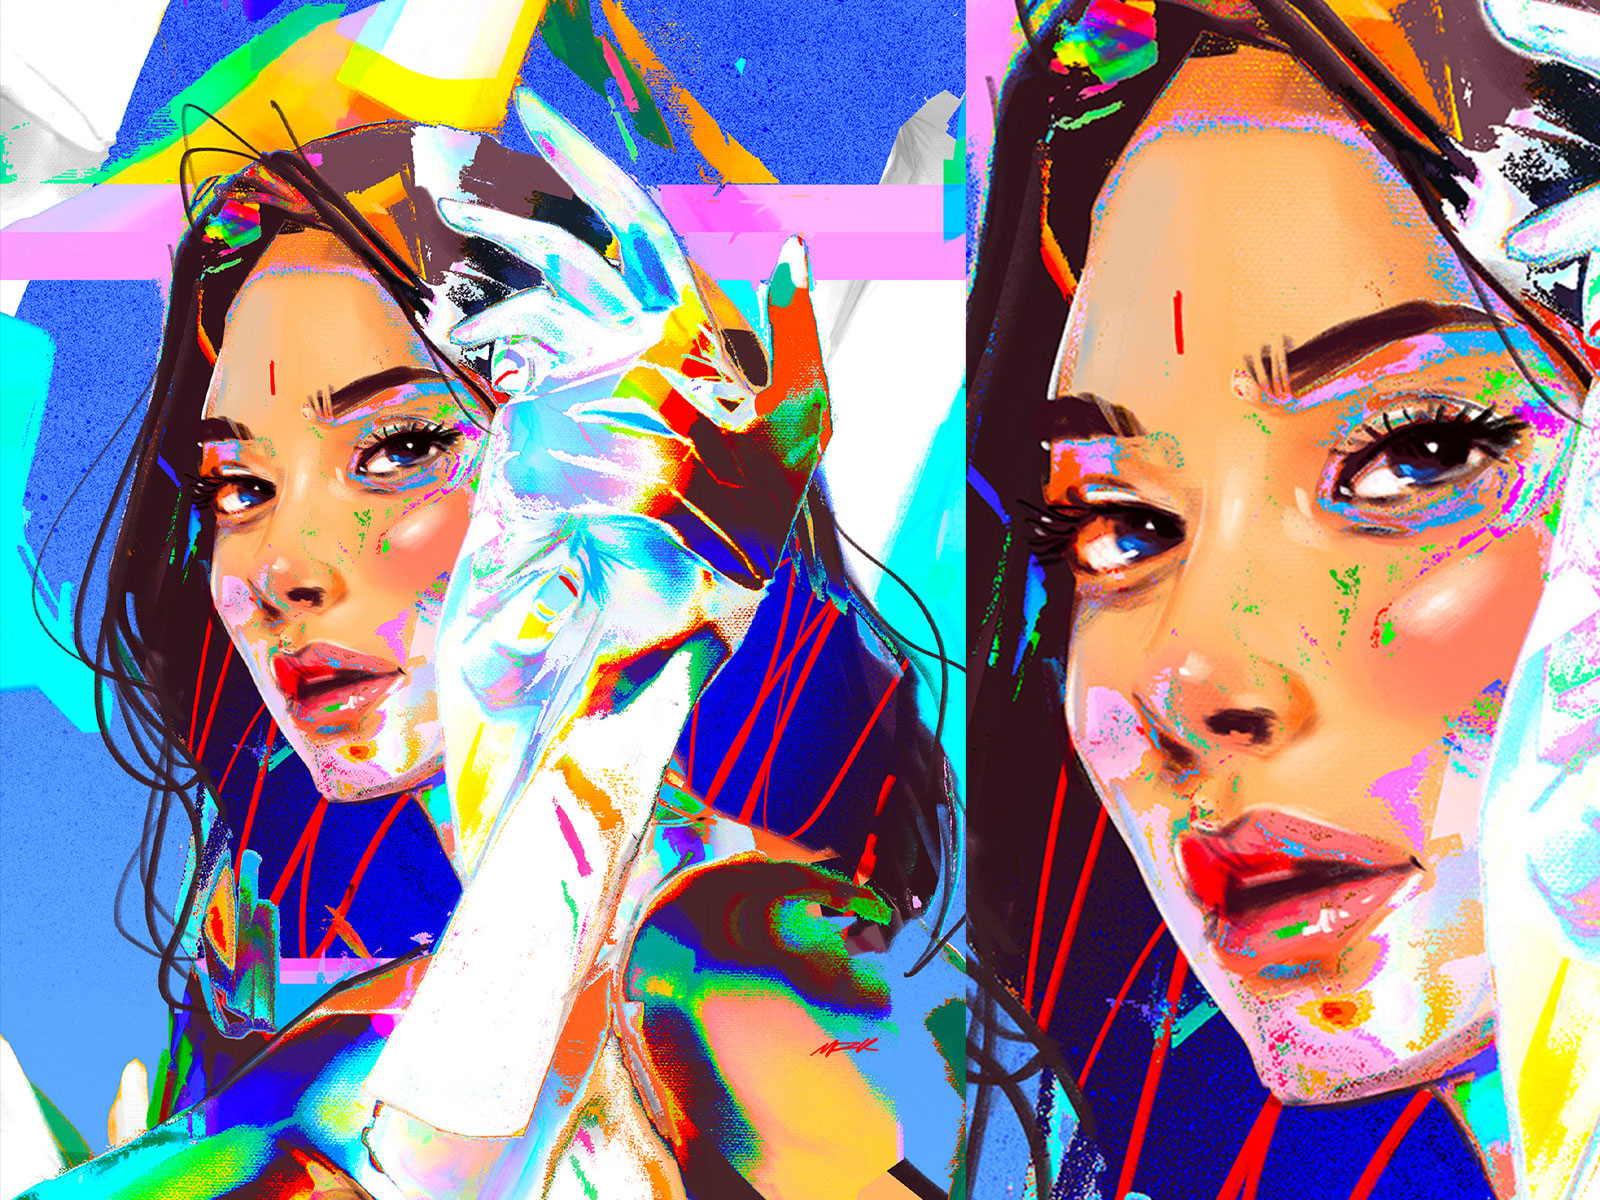 LSD  beauty beautyful character color drawing erotic eyes female girl glitch glitche gorgeous hair illustration love poster procreate real sexy woman